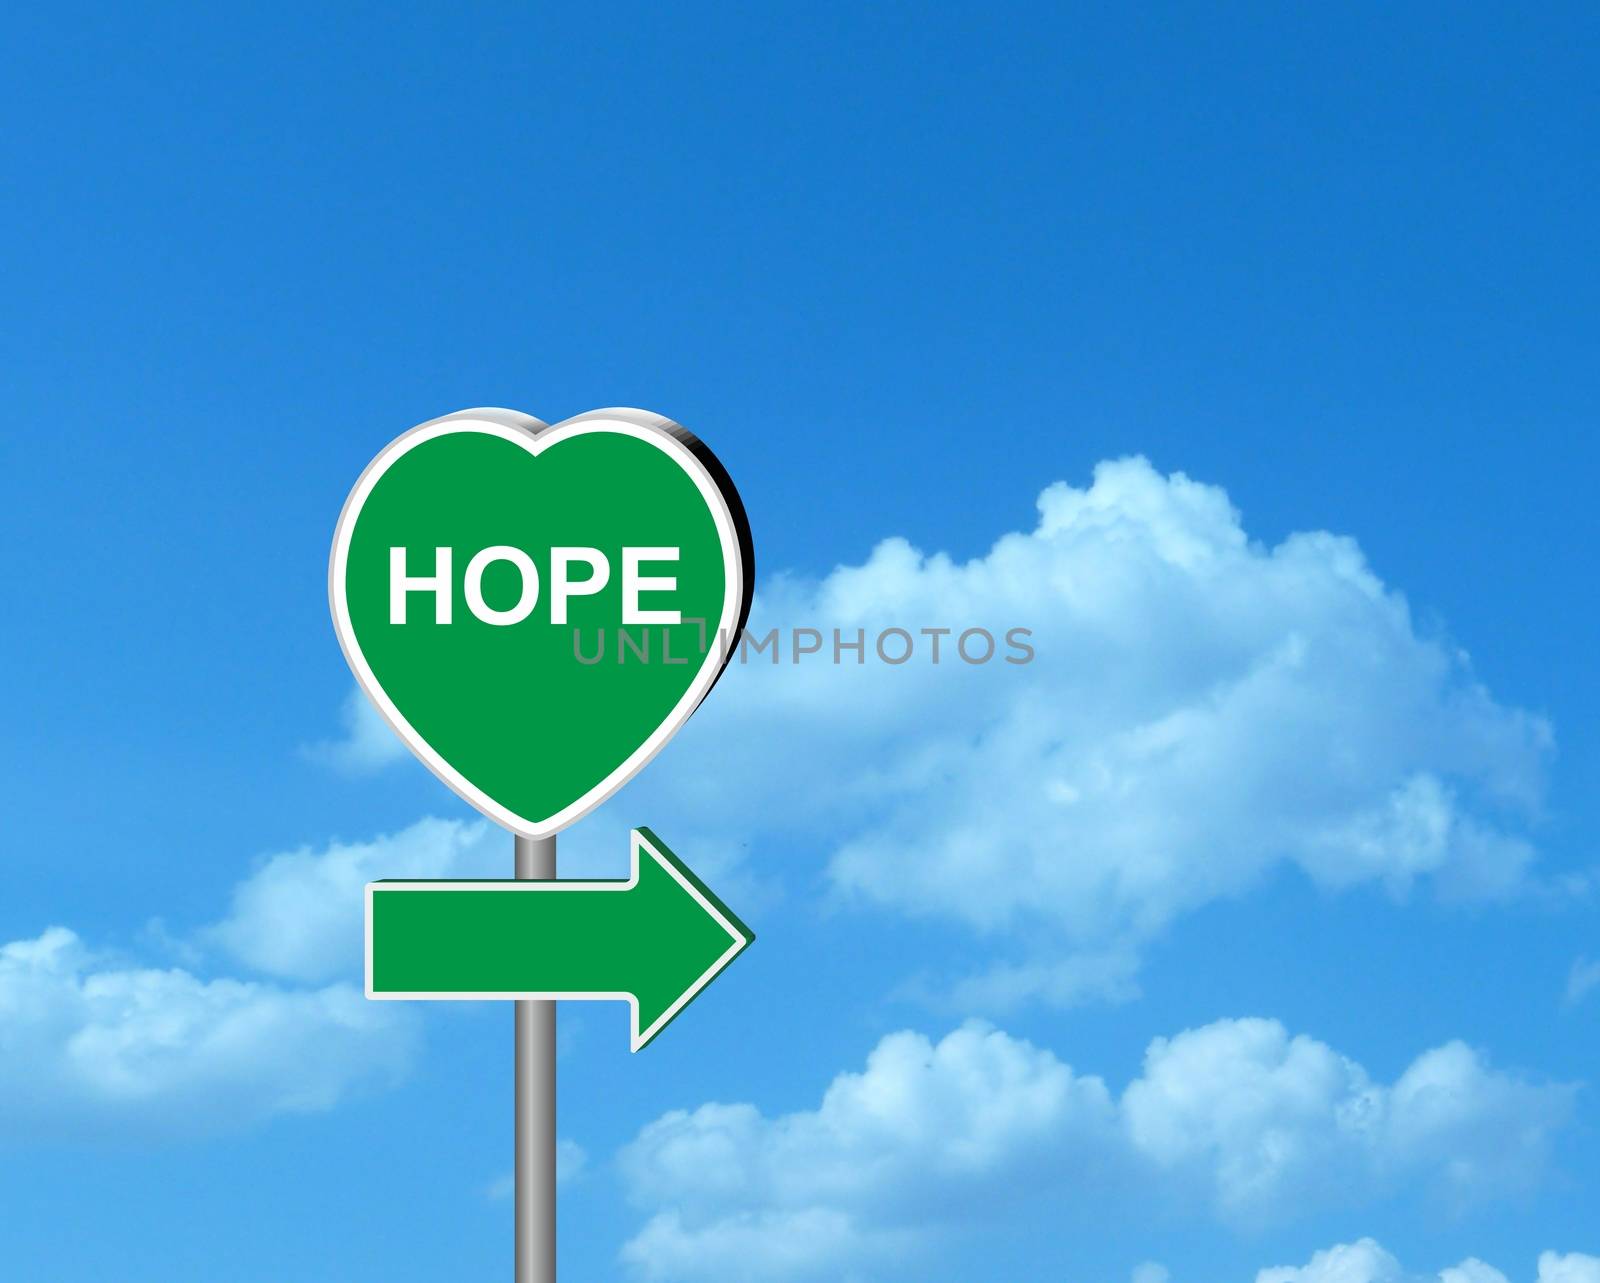 arrow, crossroads, design, direction, future, green, guide, heart, hope, illustration, information, love, message, road, road-sign, sign, signage, success, text, way, word